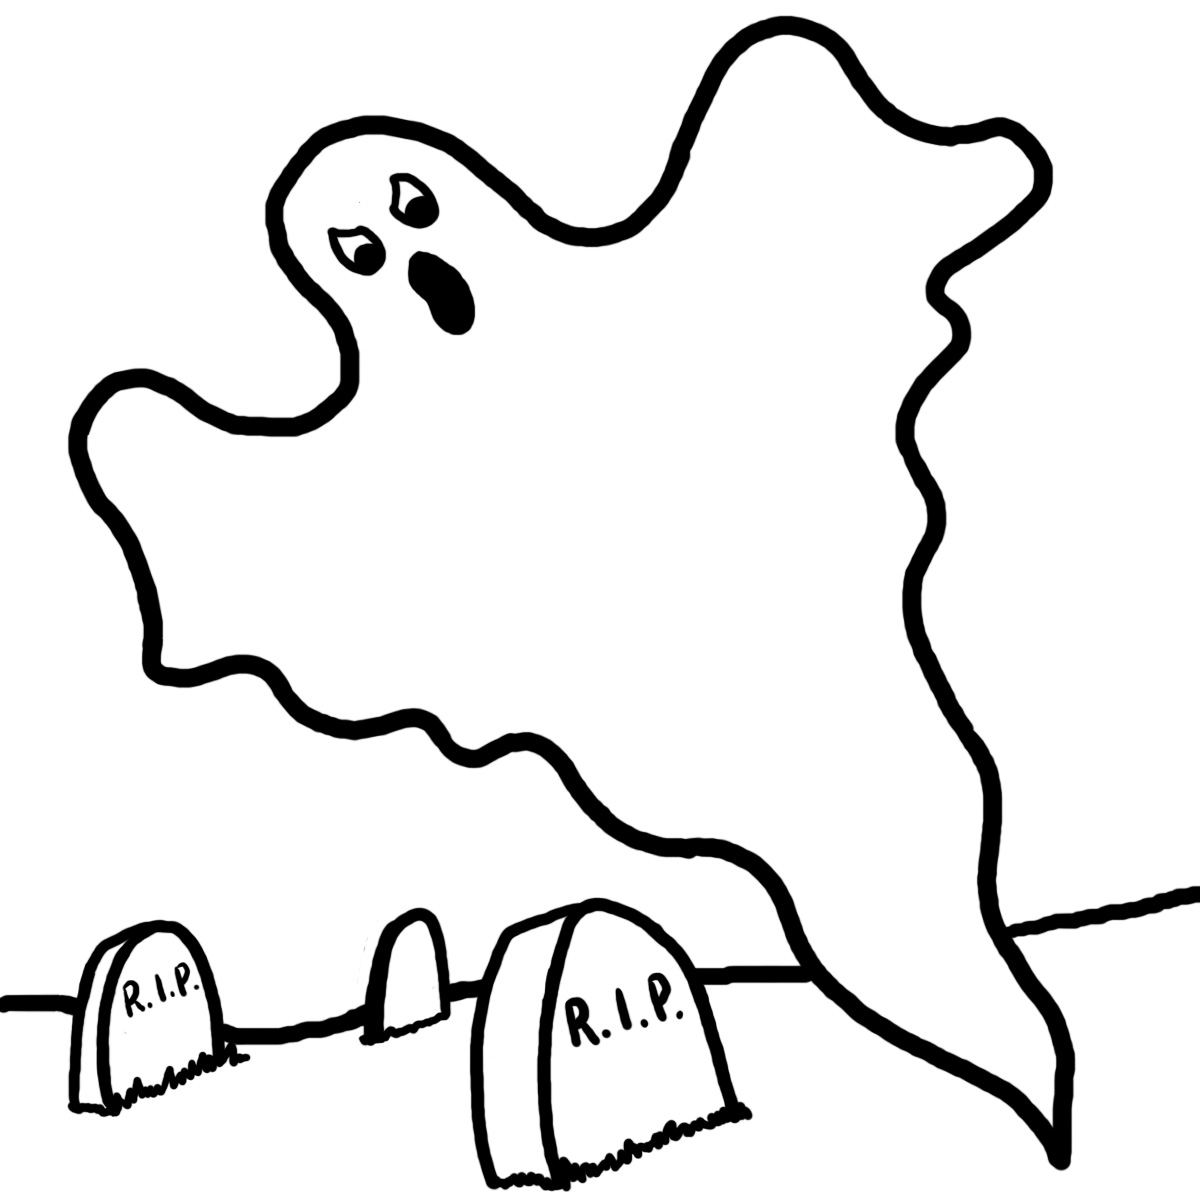 Scary ghost clipart